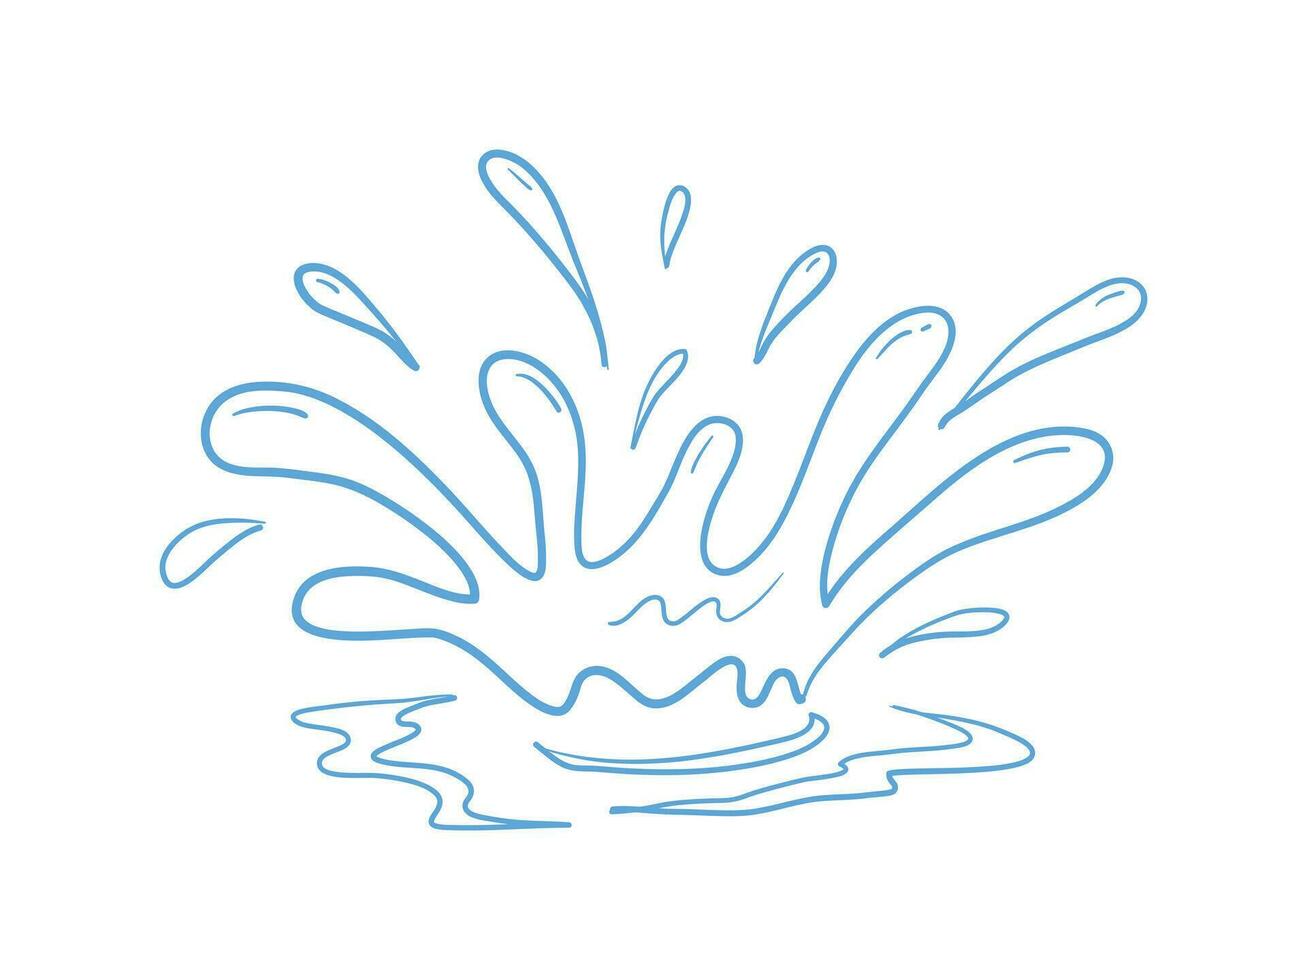 Doodle drop water splash in handdrawn style on white background vector